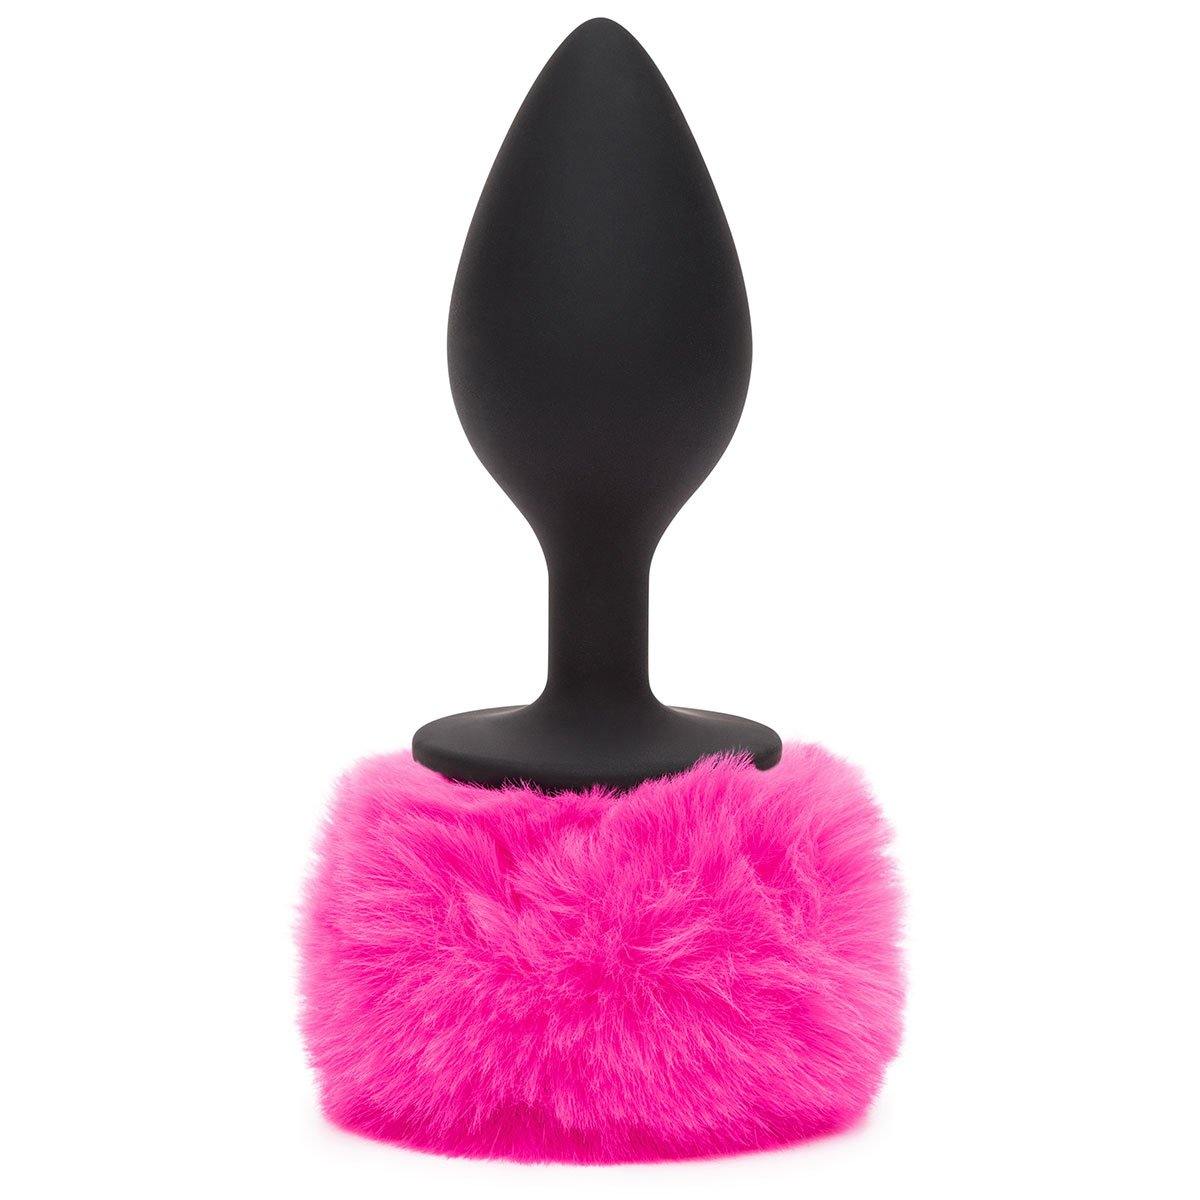 Happy Rabbit Butt Plug Black-Pink Tail Large - Buy At Luxury Toy X - Free 3-Day Shipping